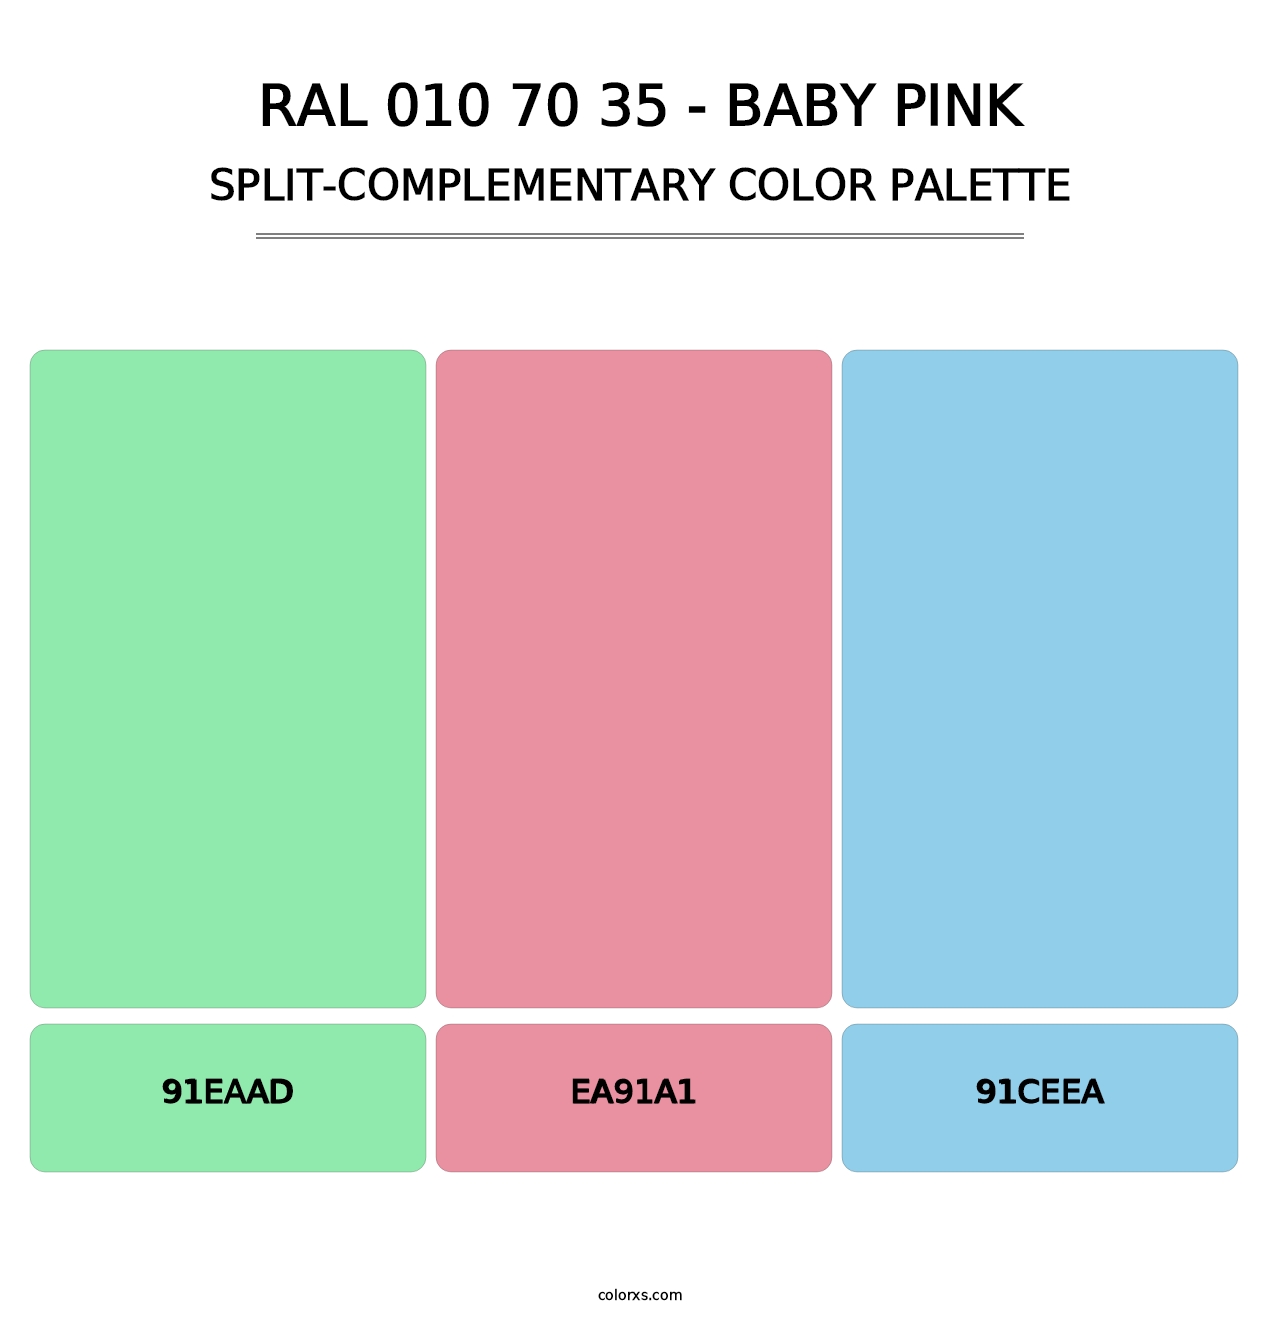 RAL 010 70 35 - Baby Pink - Split-Complementary Color Palette